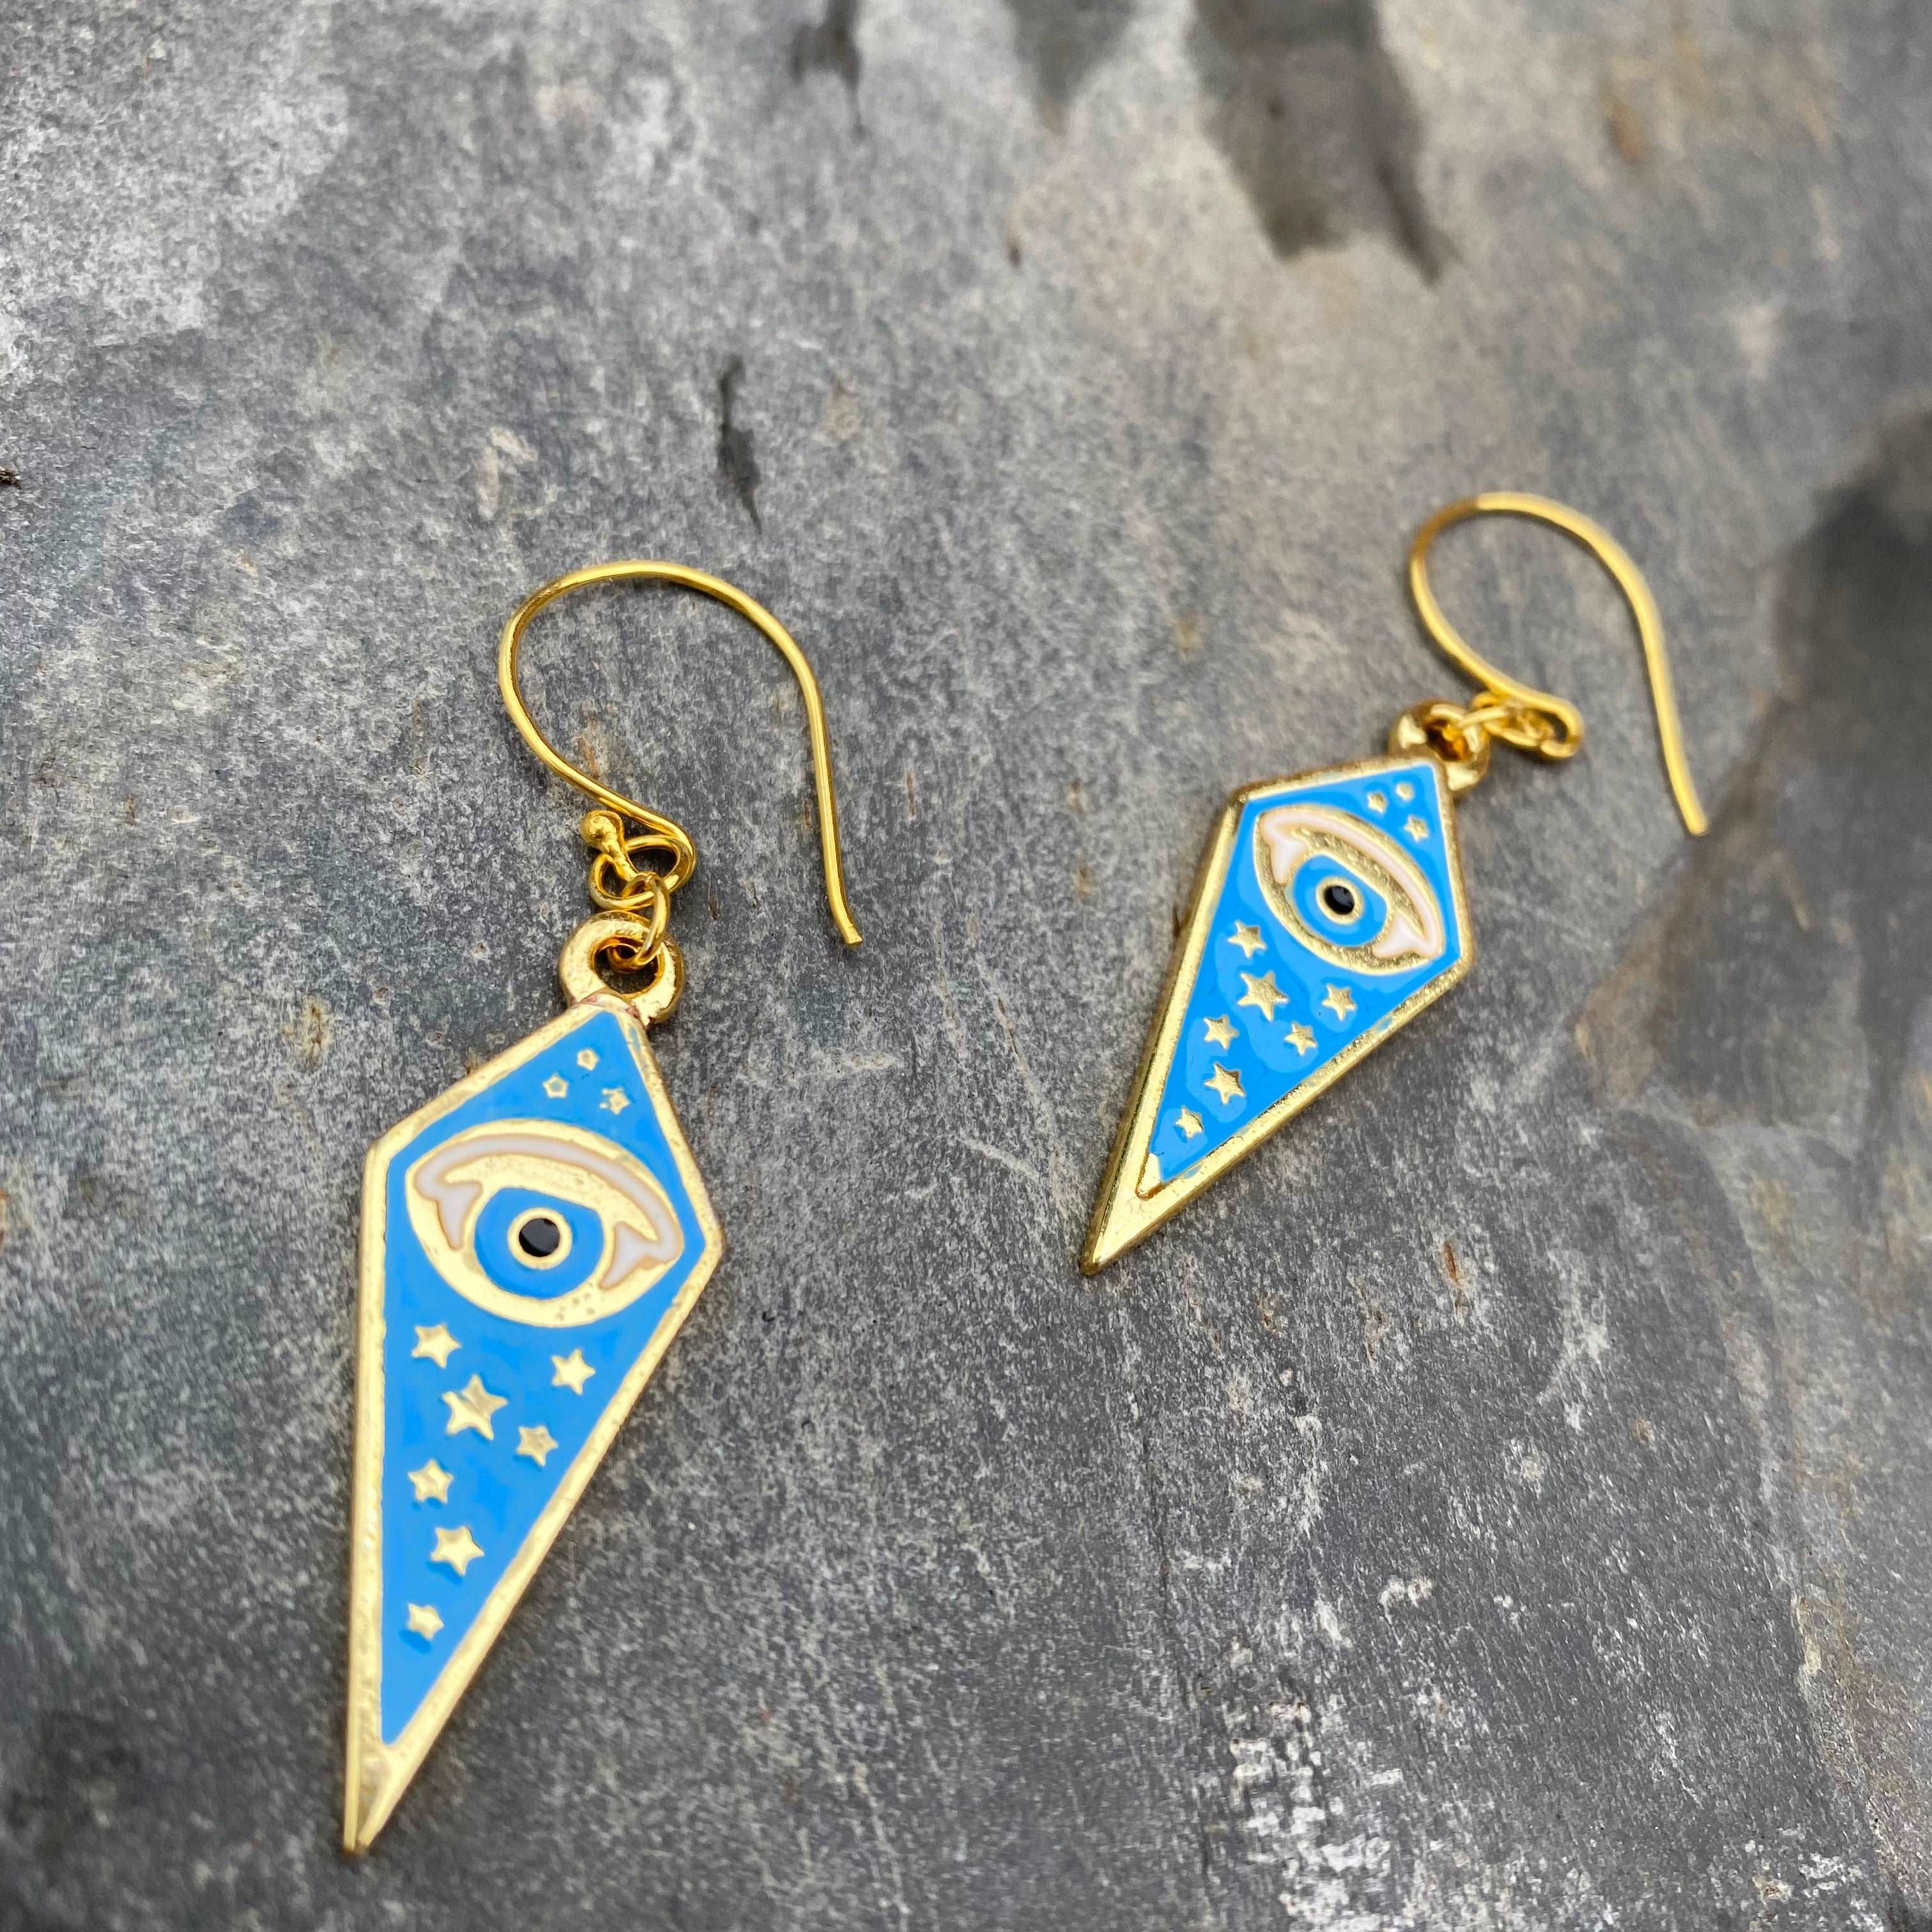 Quirky Evil Eye Earrings - Gold and Blue